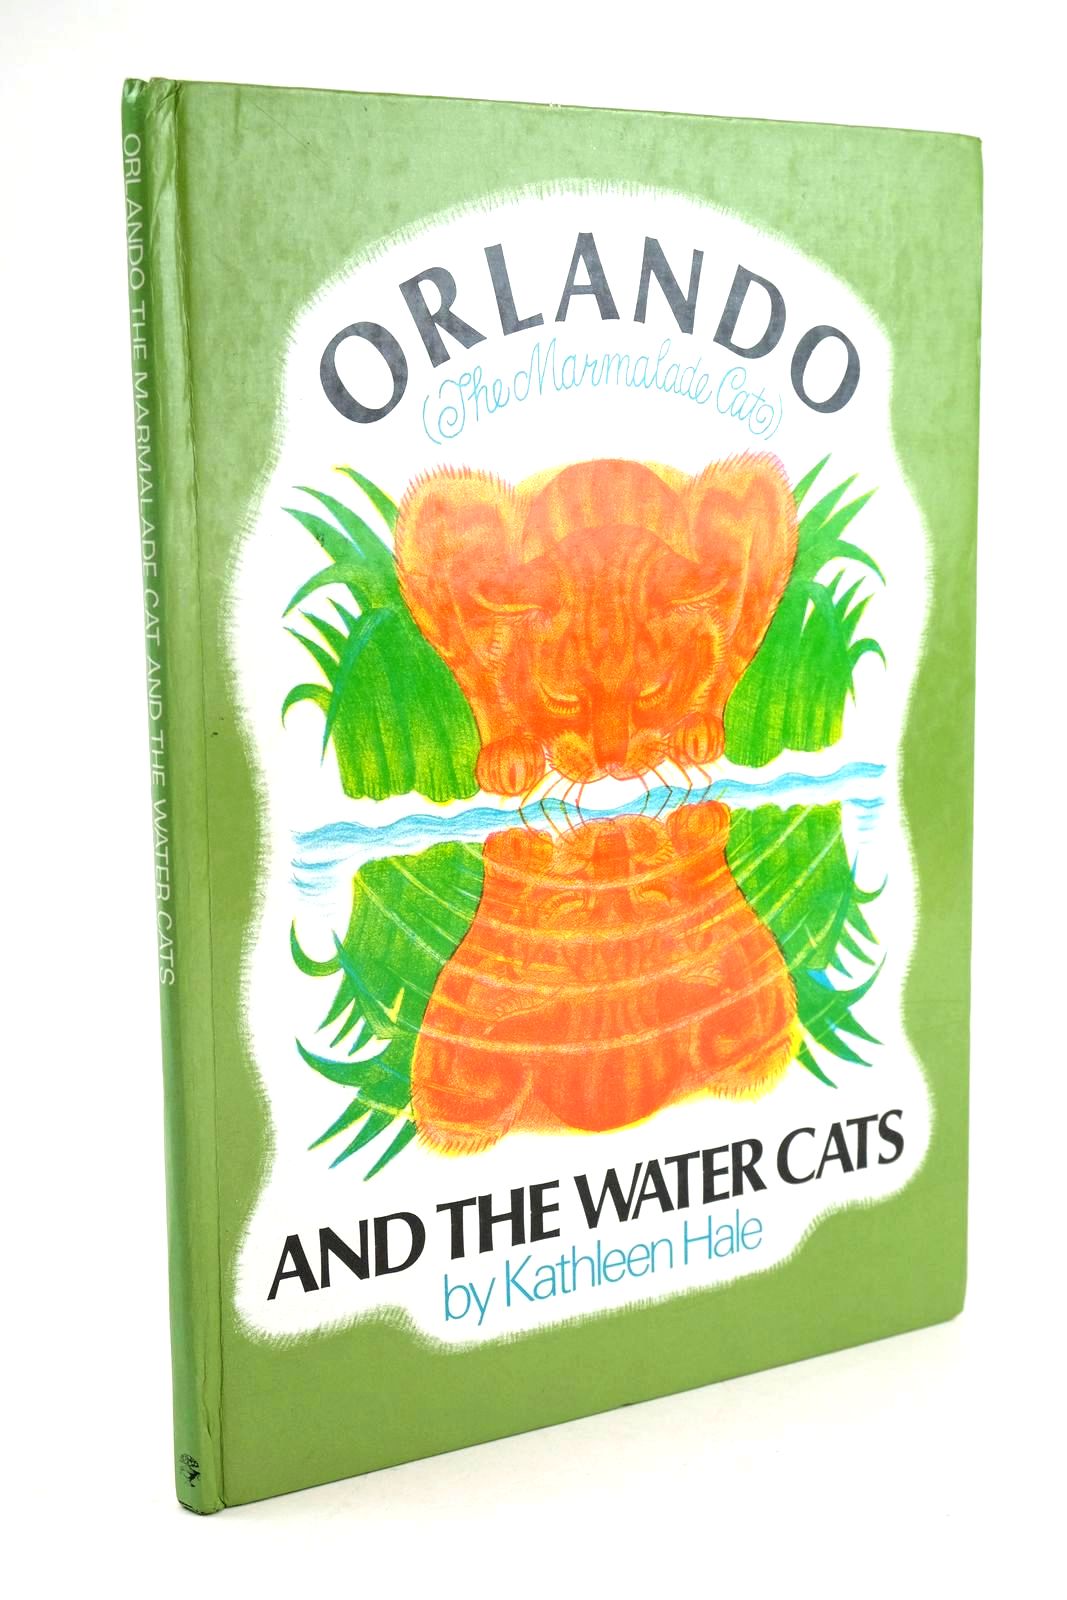 Photo of ORLANDO (THE MARMALADE CAT) AND THE WATER CATS- Stock Number: 1324080